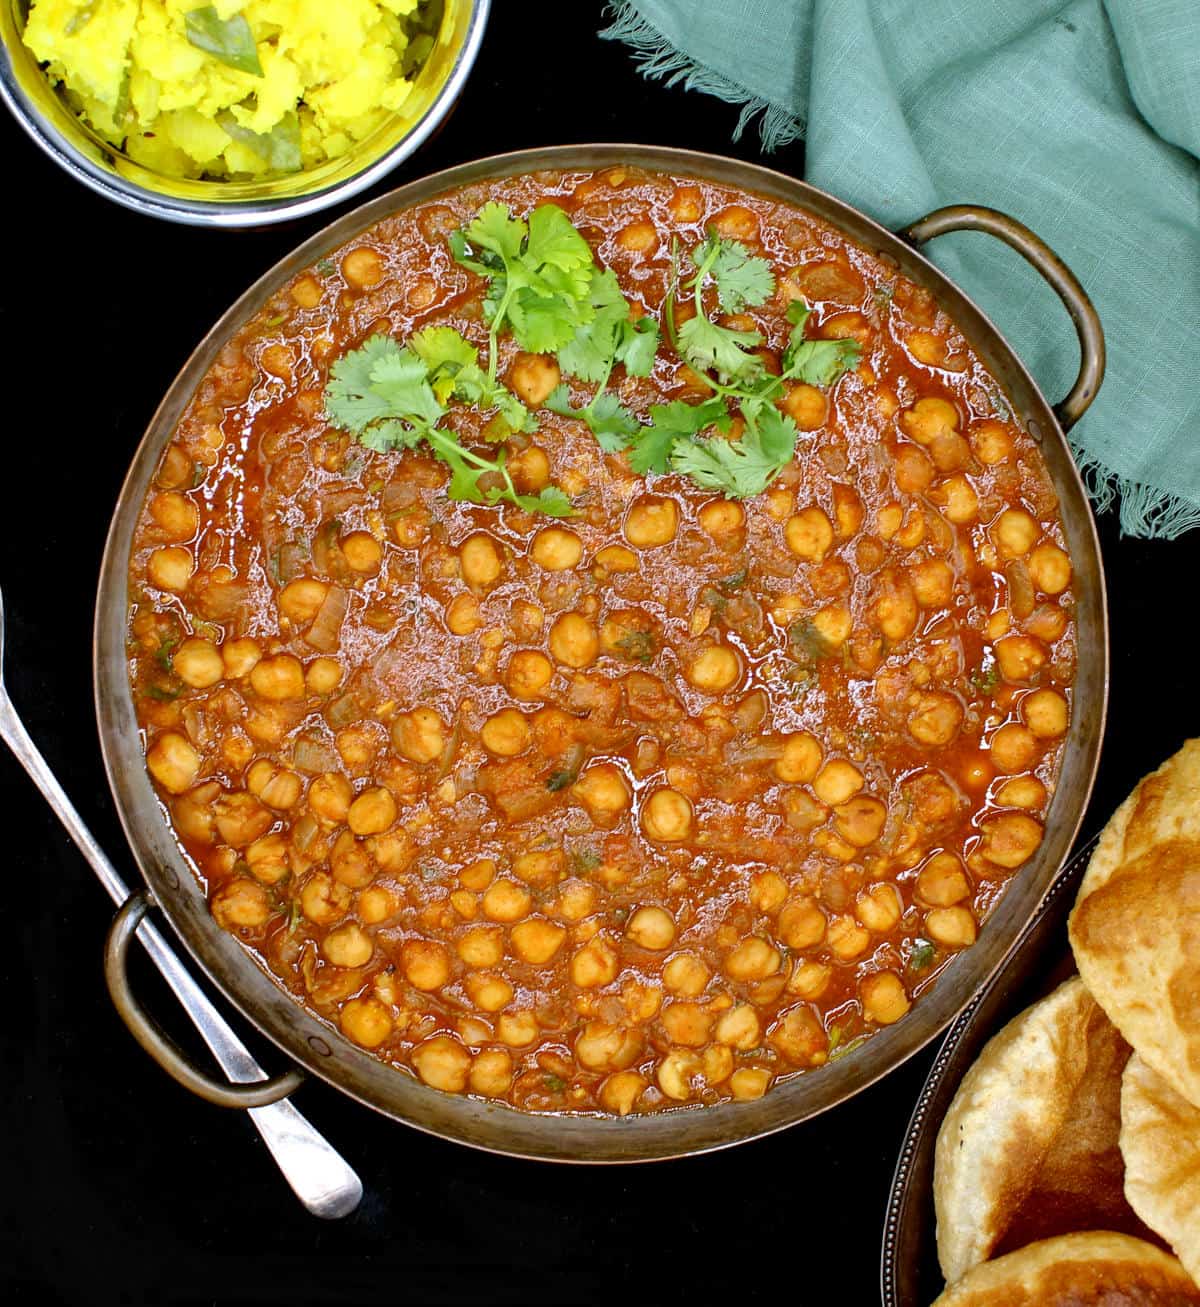 Overhead shot of chana masala in copper server with pooris and potato sabzi on the side and a serving spoon.